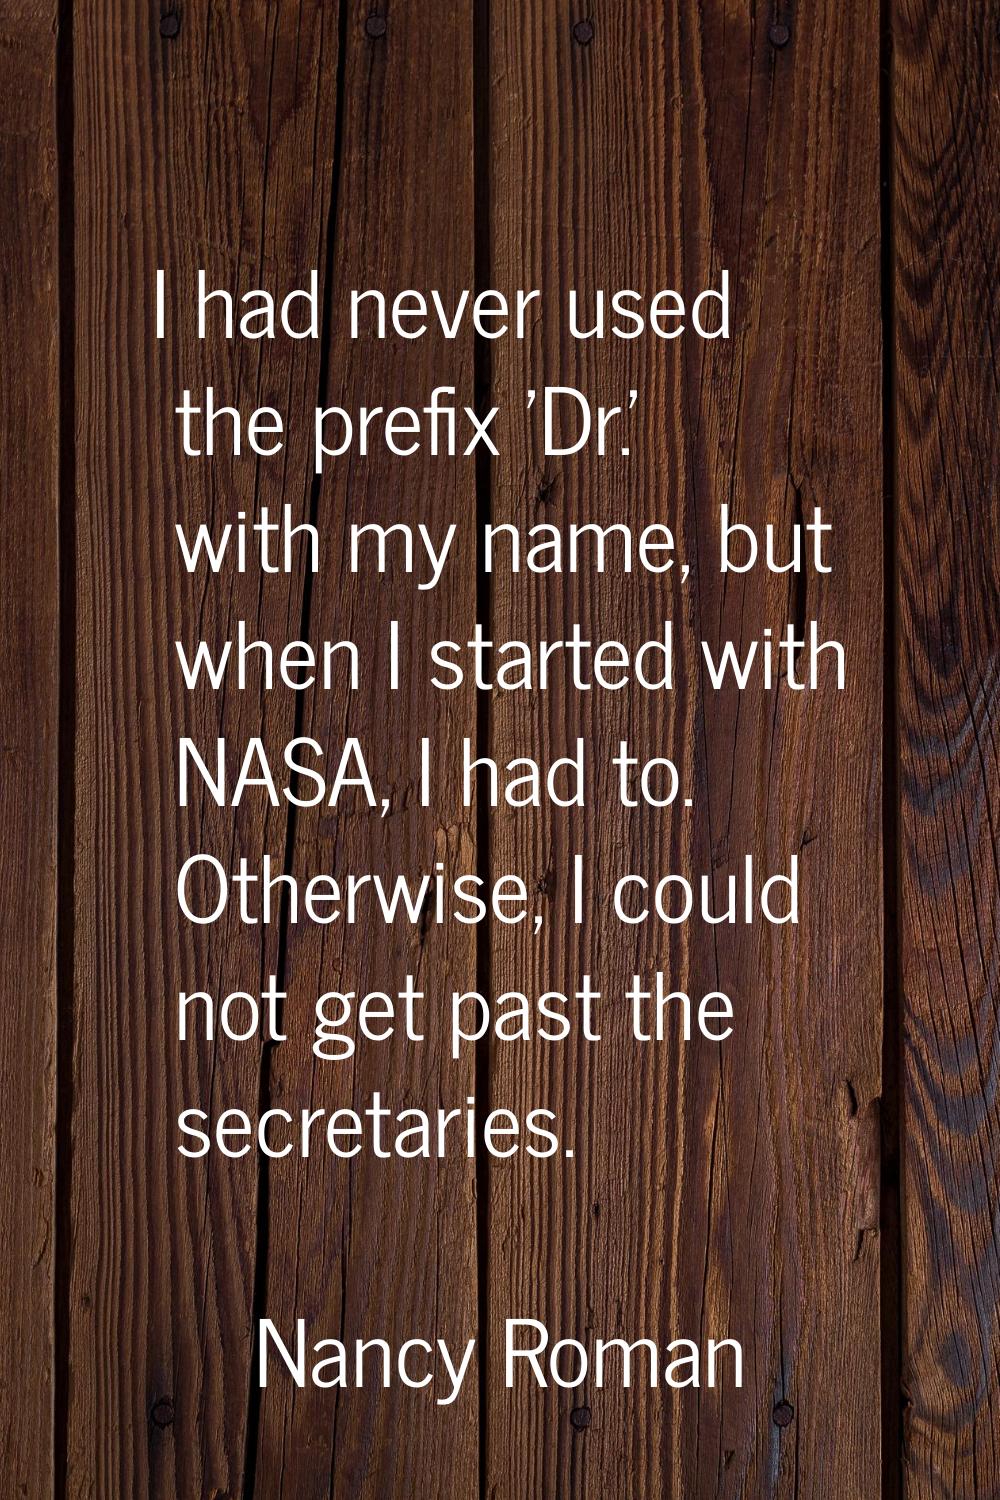 I had never used the prefix 'Dr.' with my name, but when I started with NASA, I had to. Otherwise, 